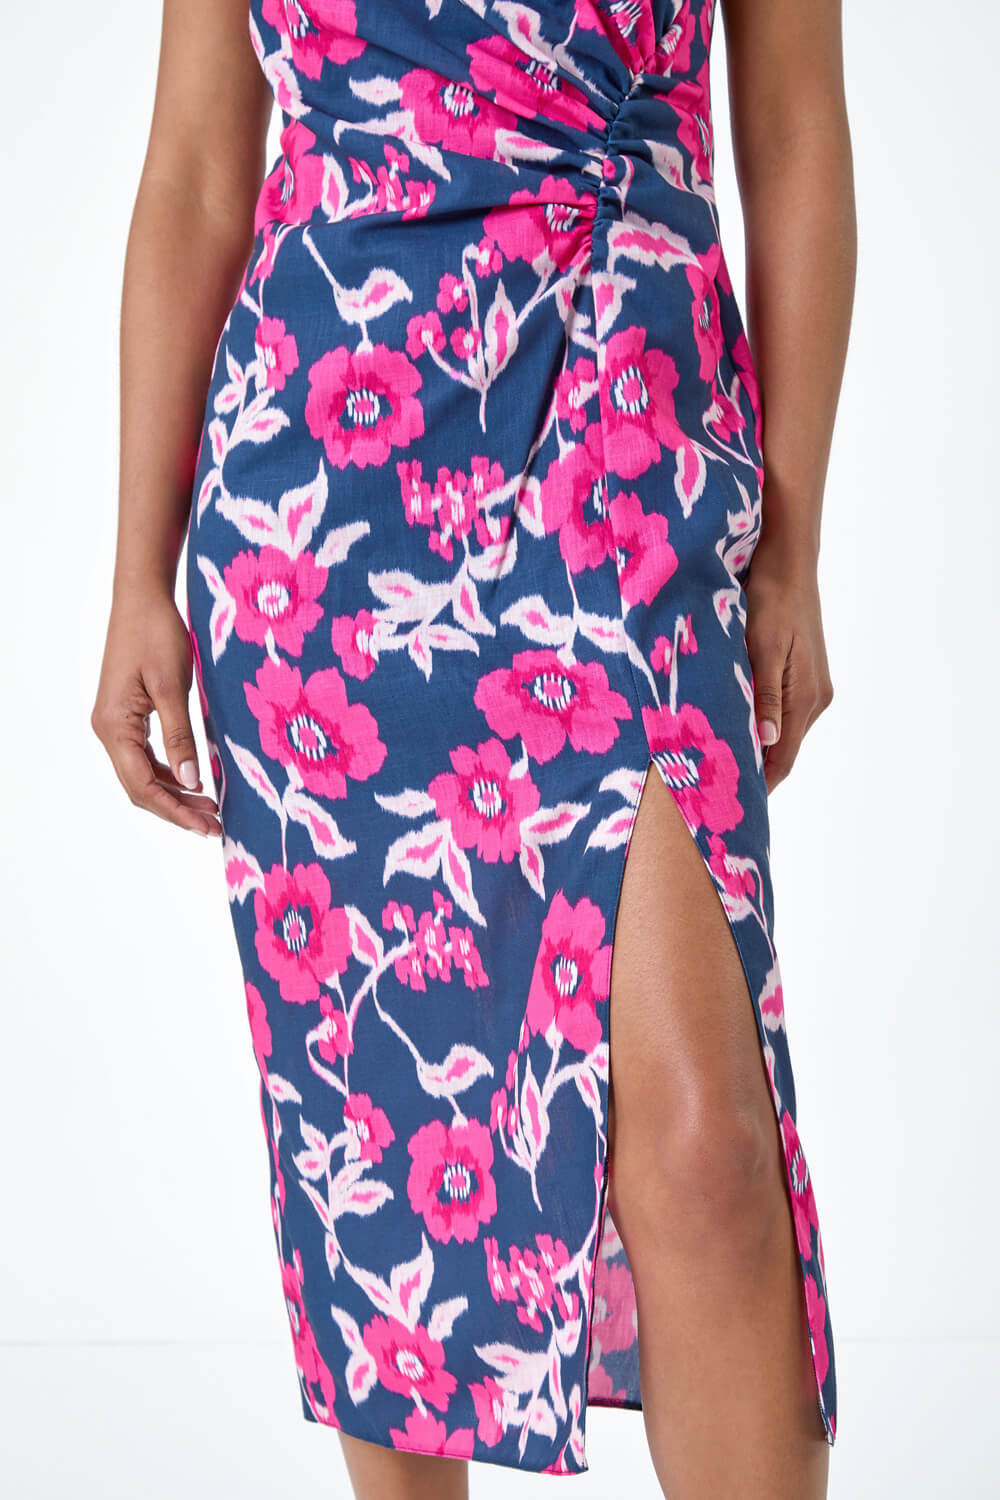 PINK Floral Linen Look Ruched Midi Dress, Image 5 of 5